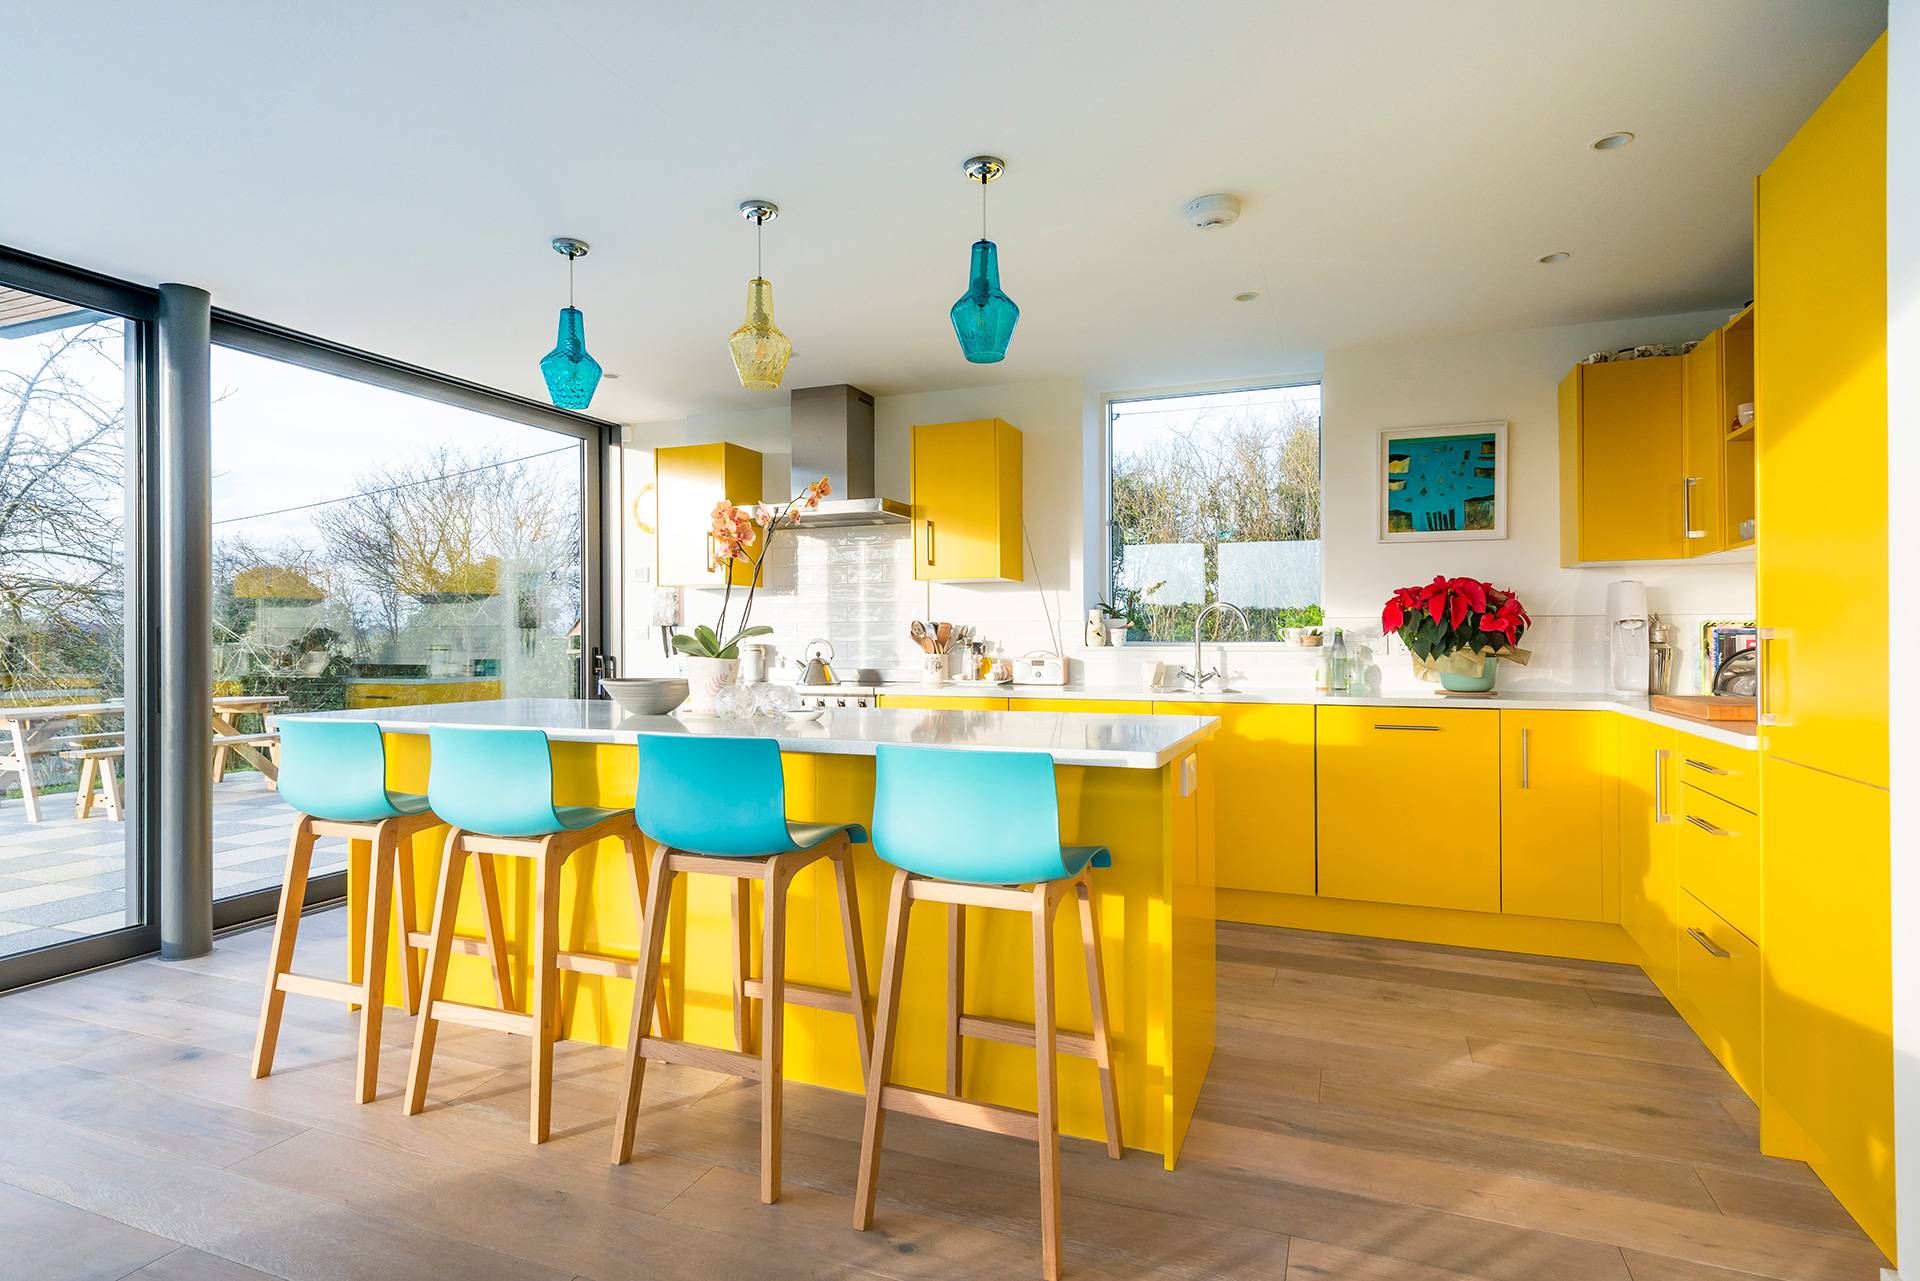 bright yellow modern kitchen with blue chairs at breakfast bar